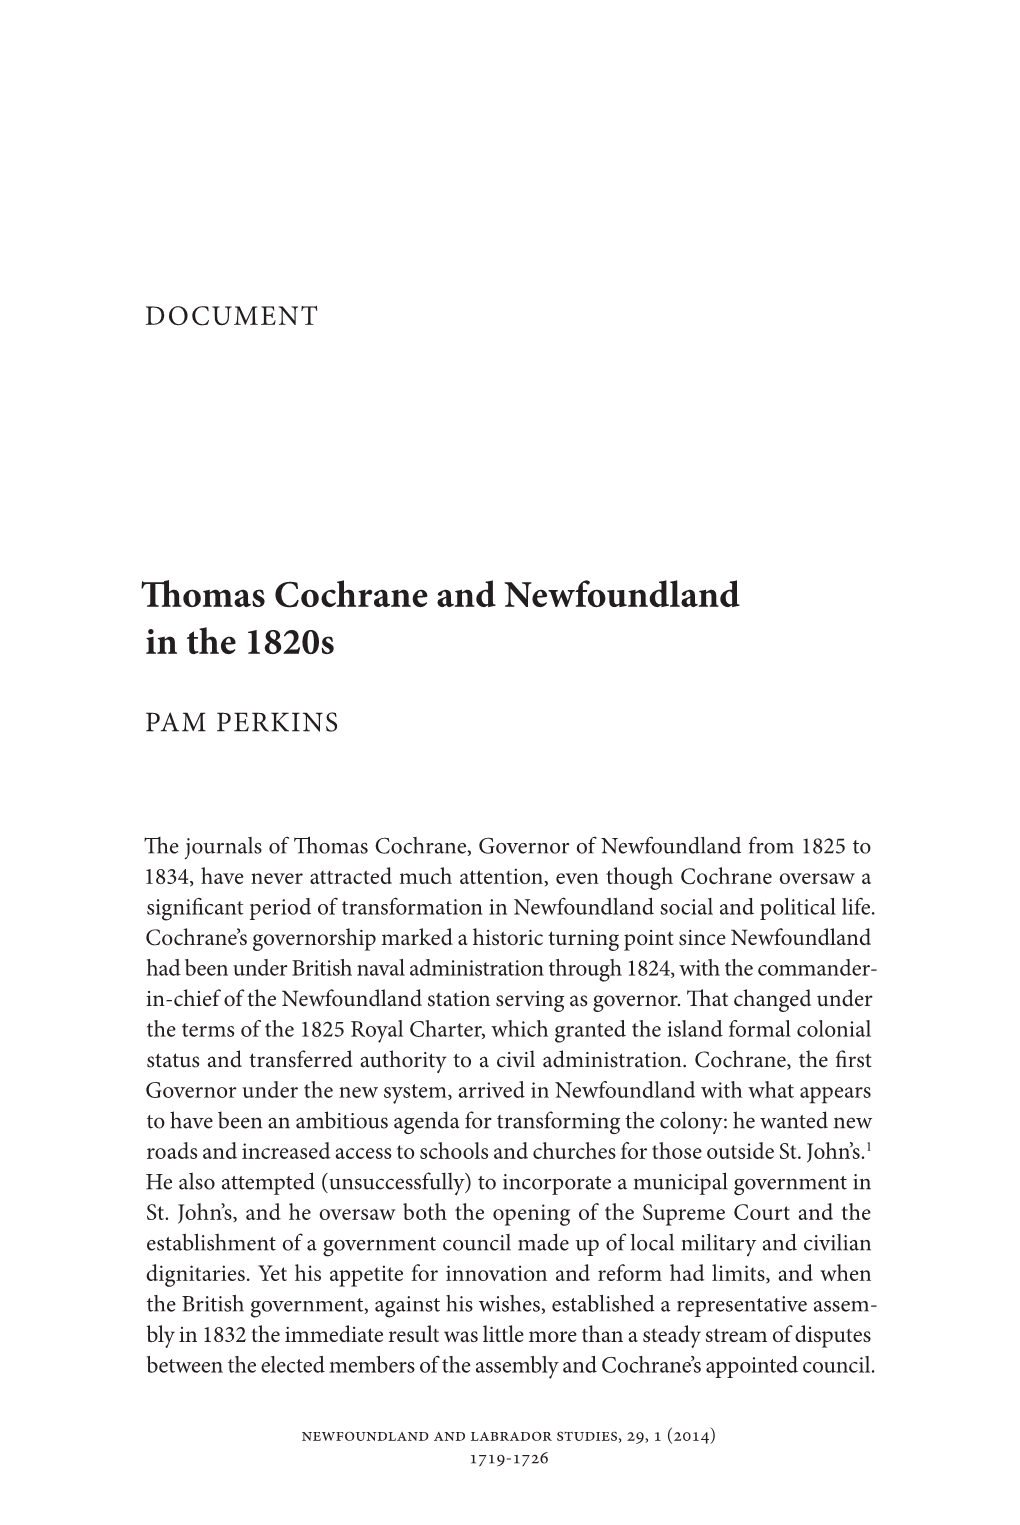 Thomas Cochrane and Newfoundland in the 1820S